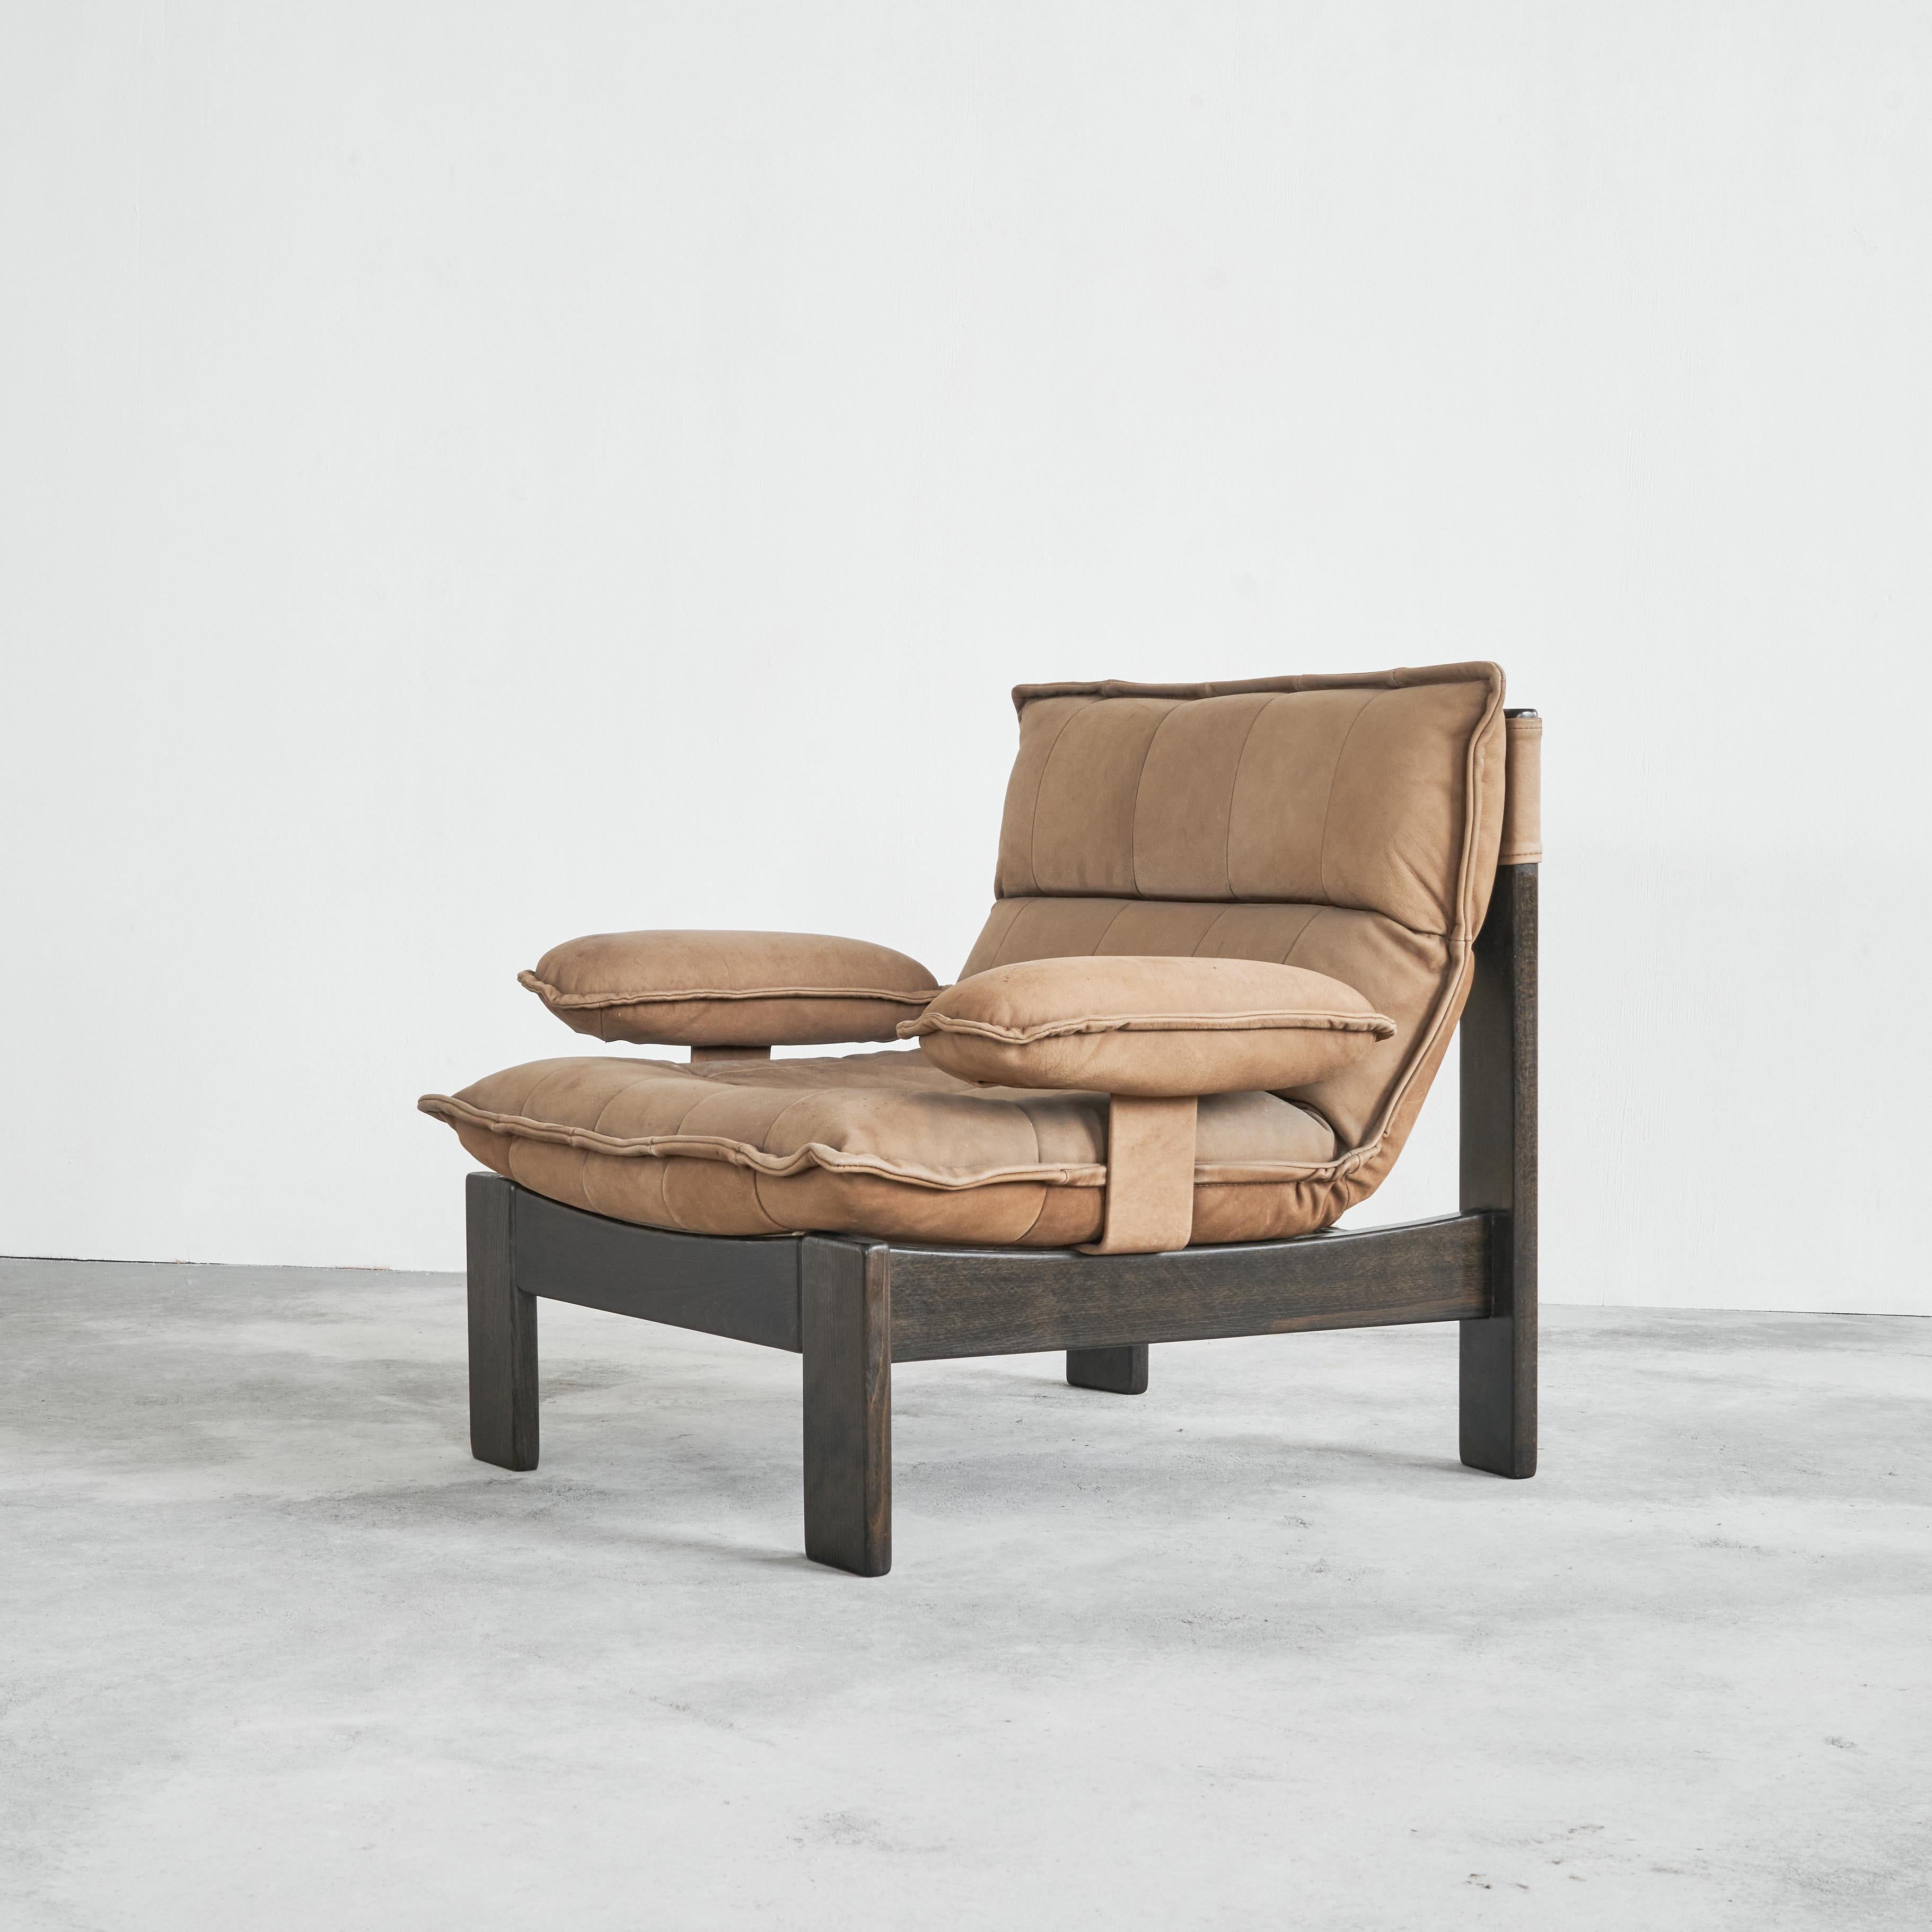 Lounge chair in Suede and stained oak, Europe, 1970s.

This is a very distinct 1970s lounge chair in very beautiful brown suede leather and dark stained oak. Great contrast between the dark stained frame and the luxurious and rich light brown